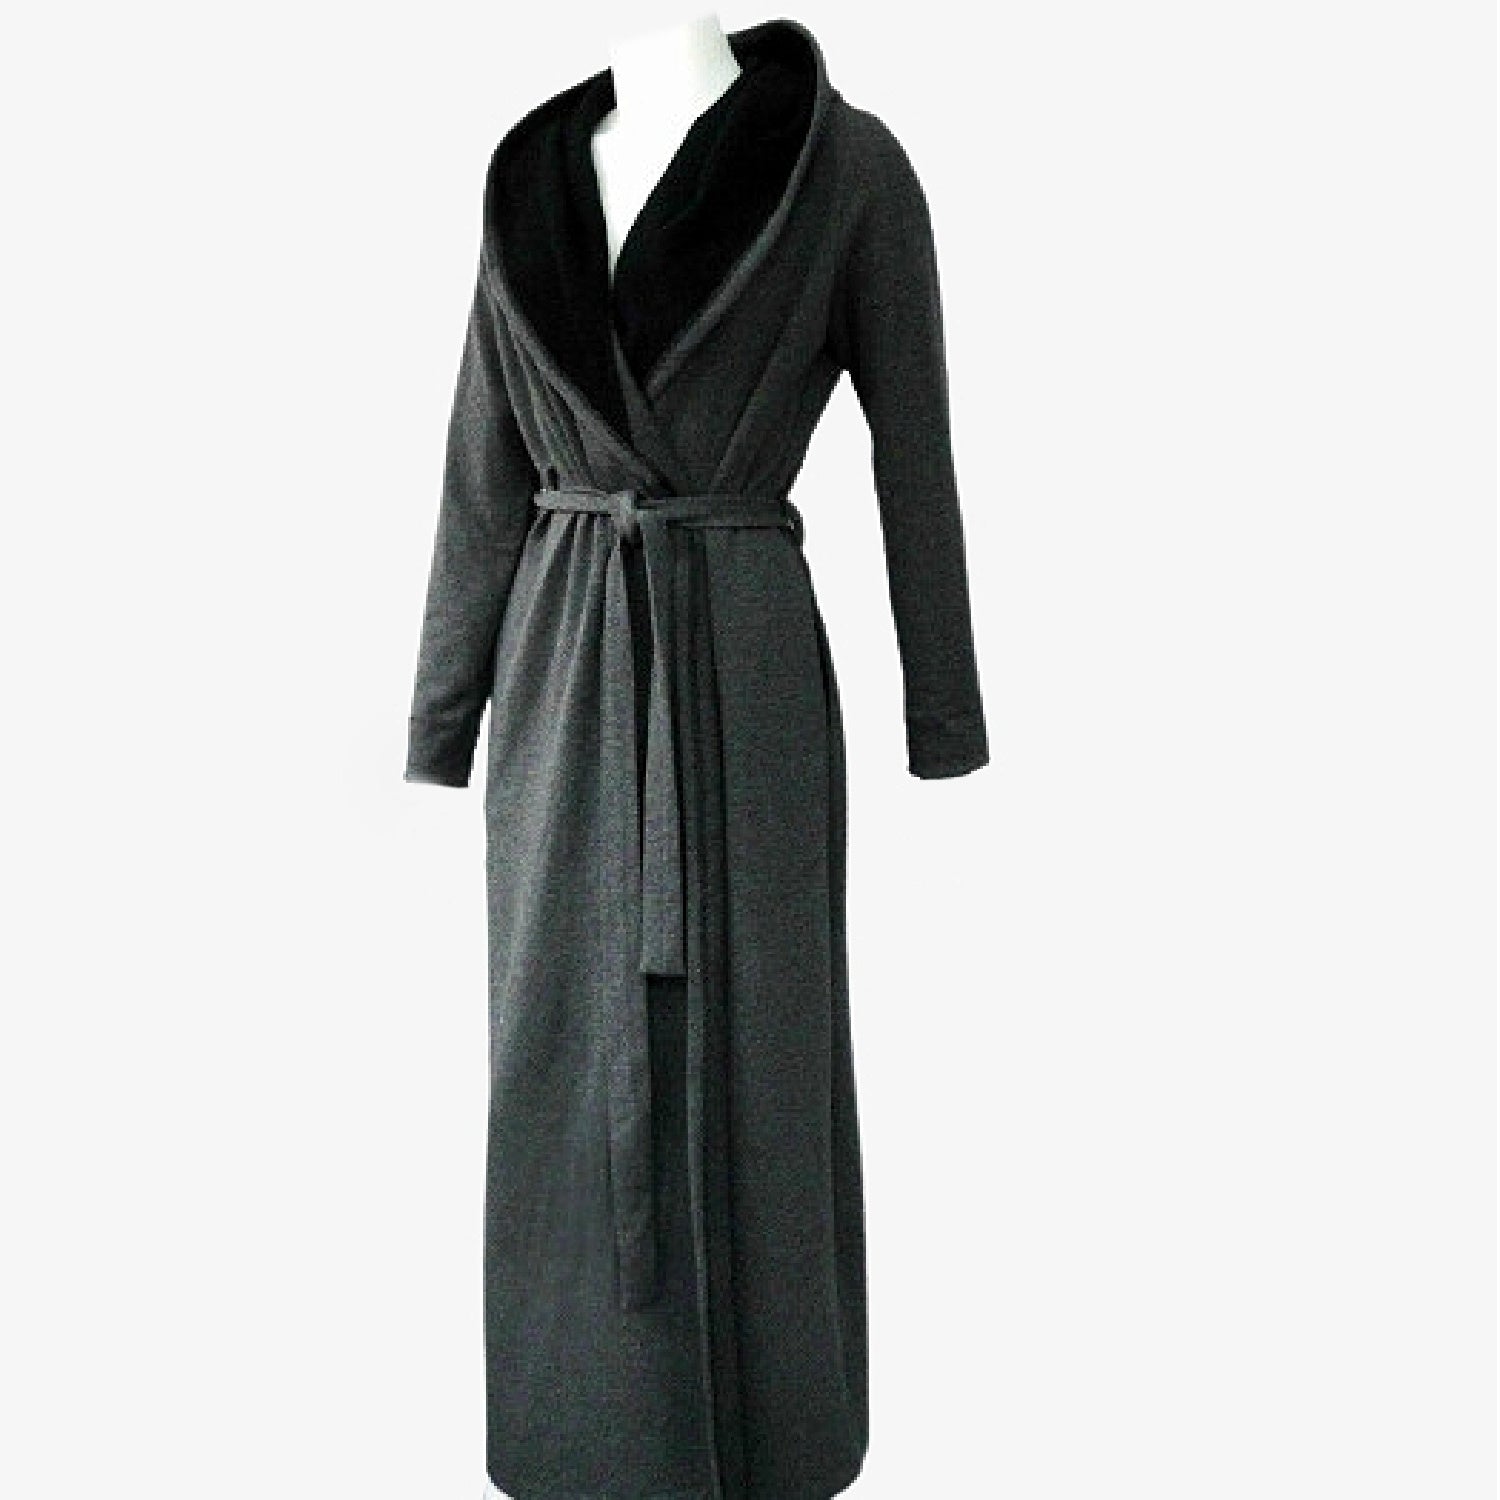 extra long women's organic cotton gray robe | Made in Canada cotton robes and loungewear 